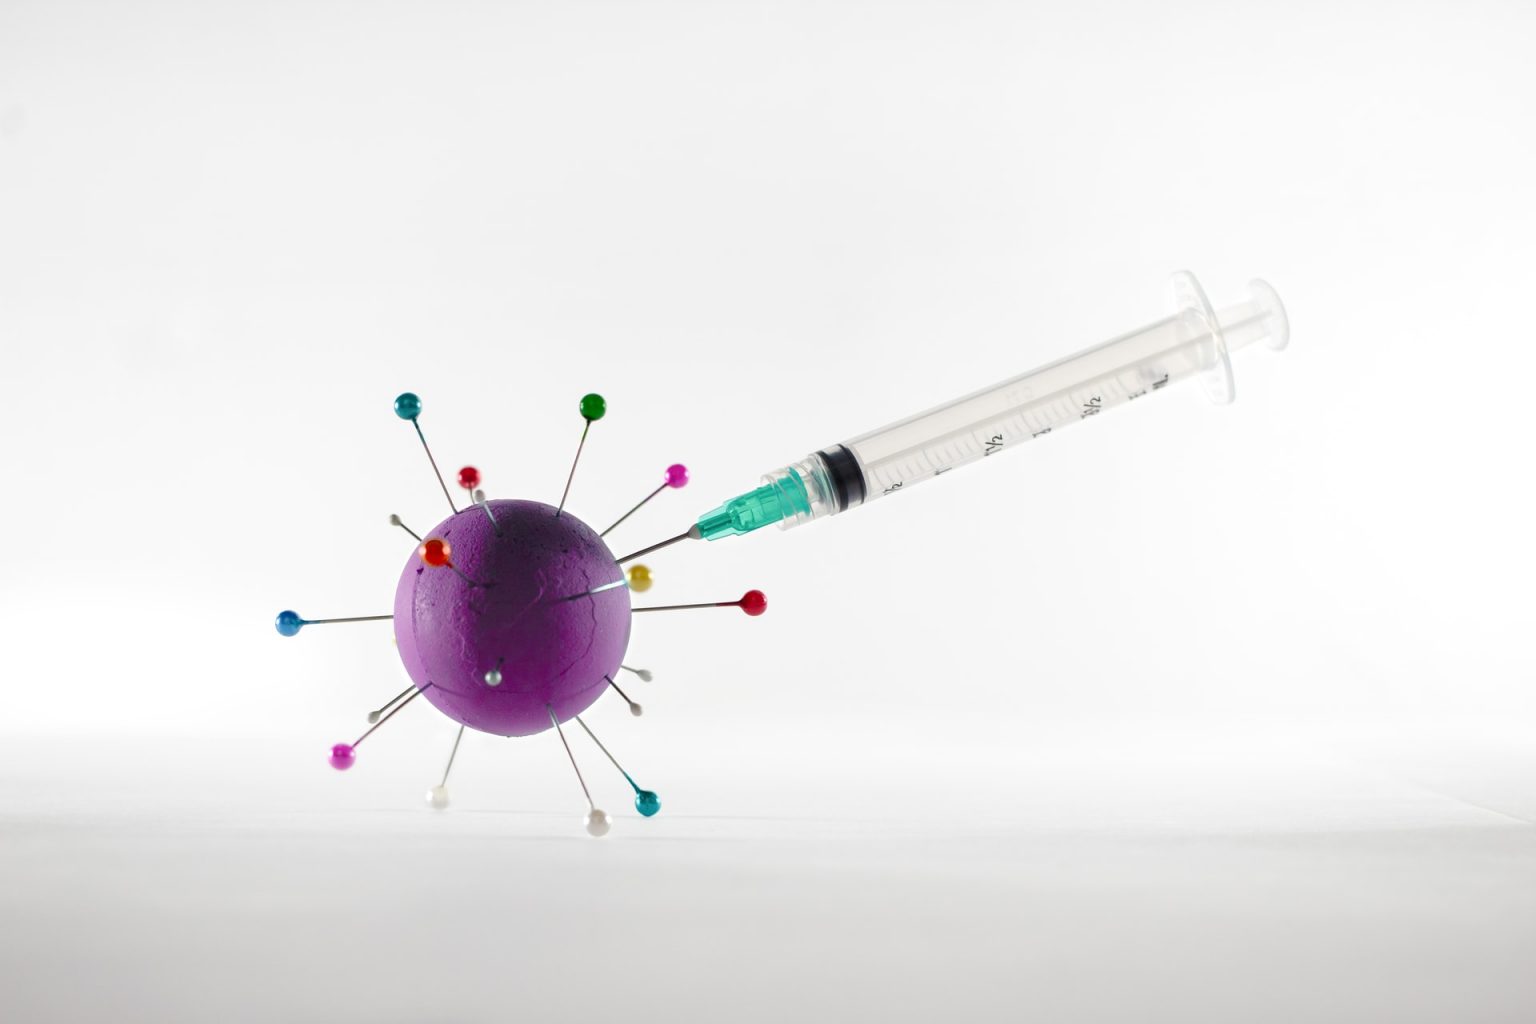 Photograph of a syringe with hypodermic needle stuck into an artistic representation of the coronavirus molecule (a painted styrofoam ball with coloured pins stuck in it).